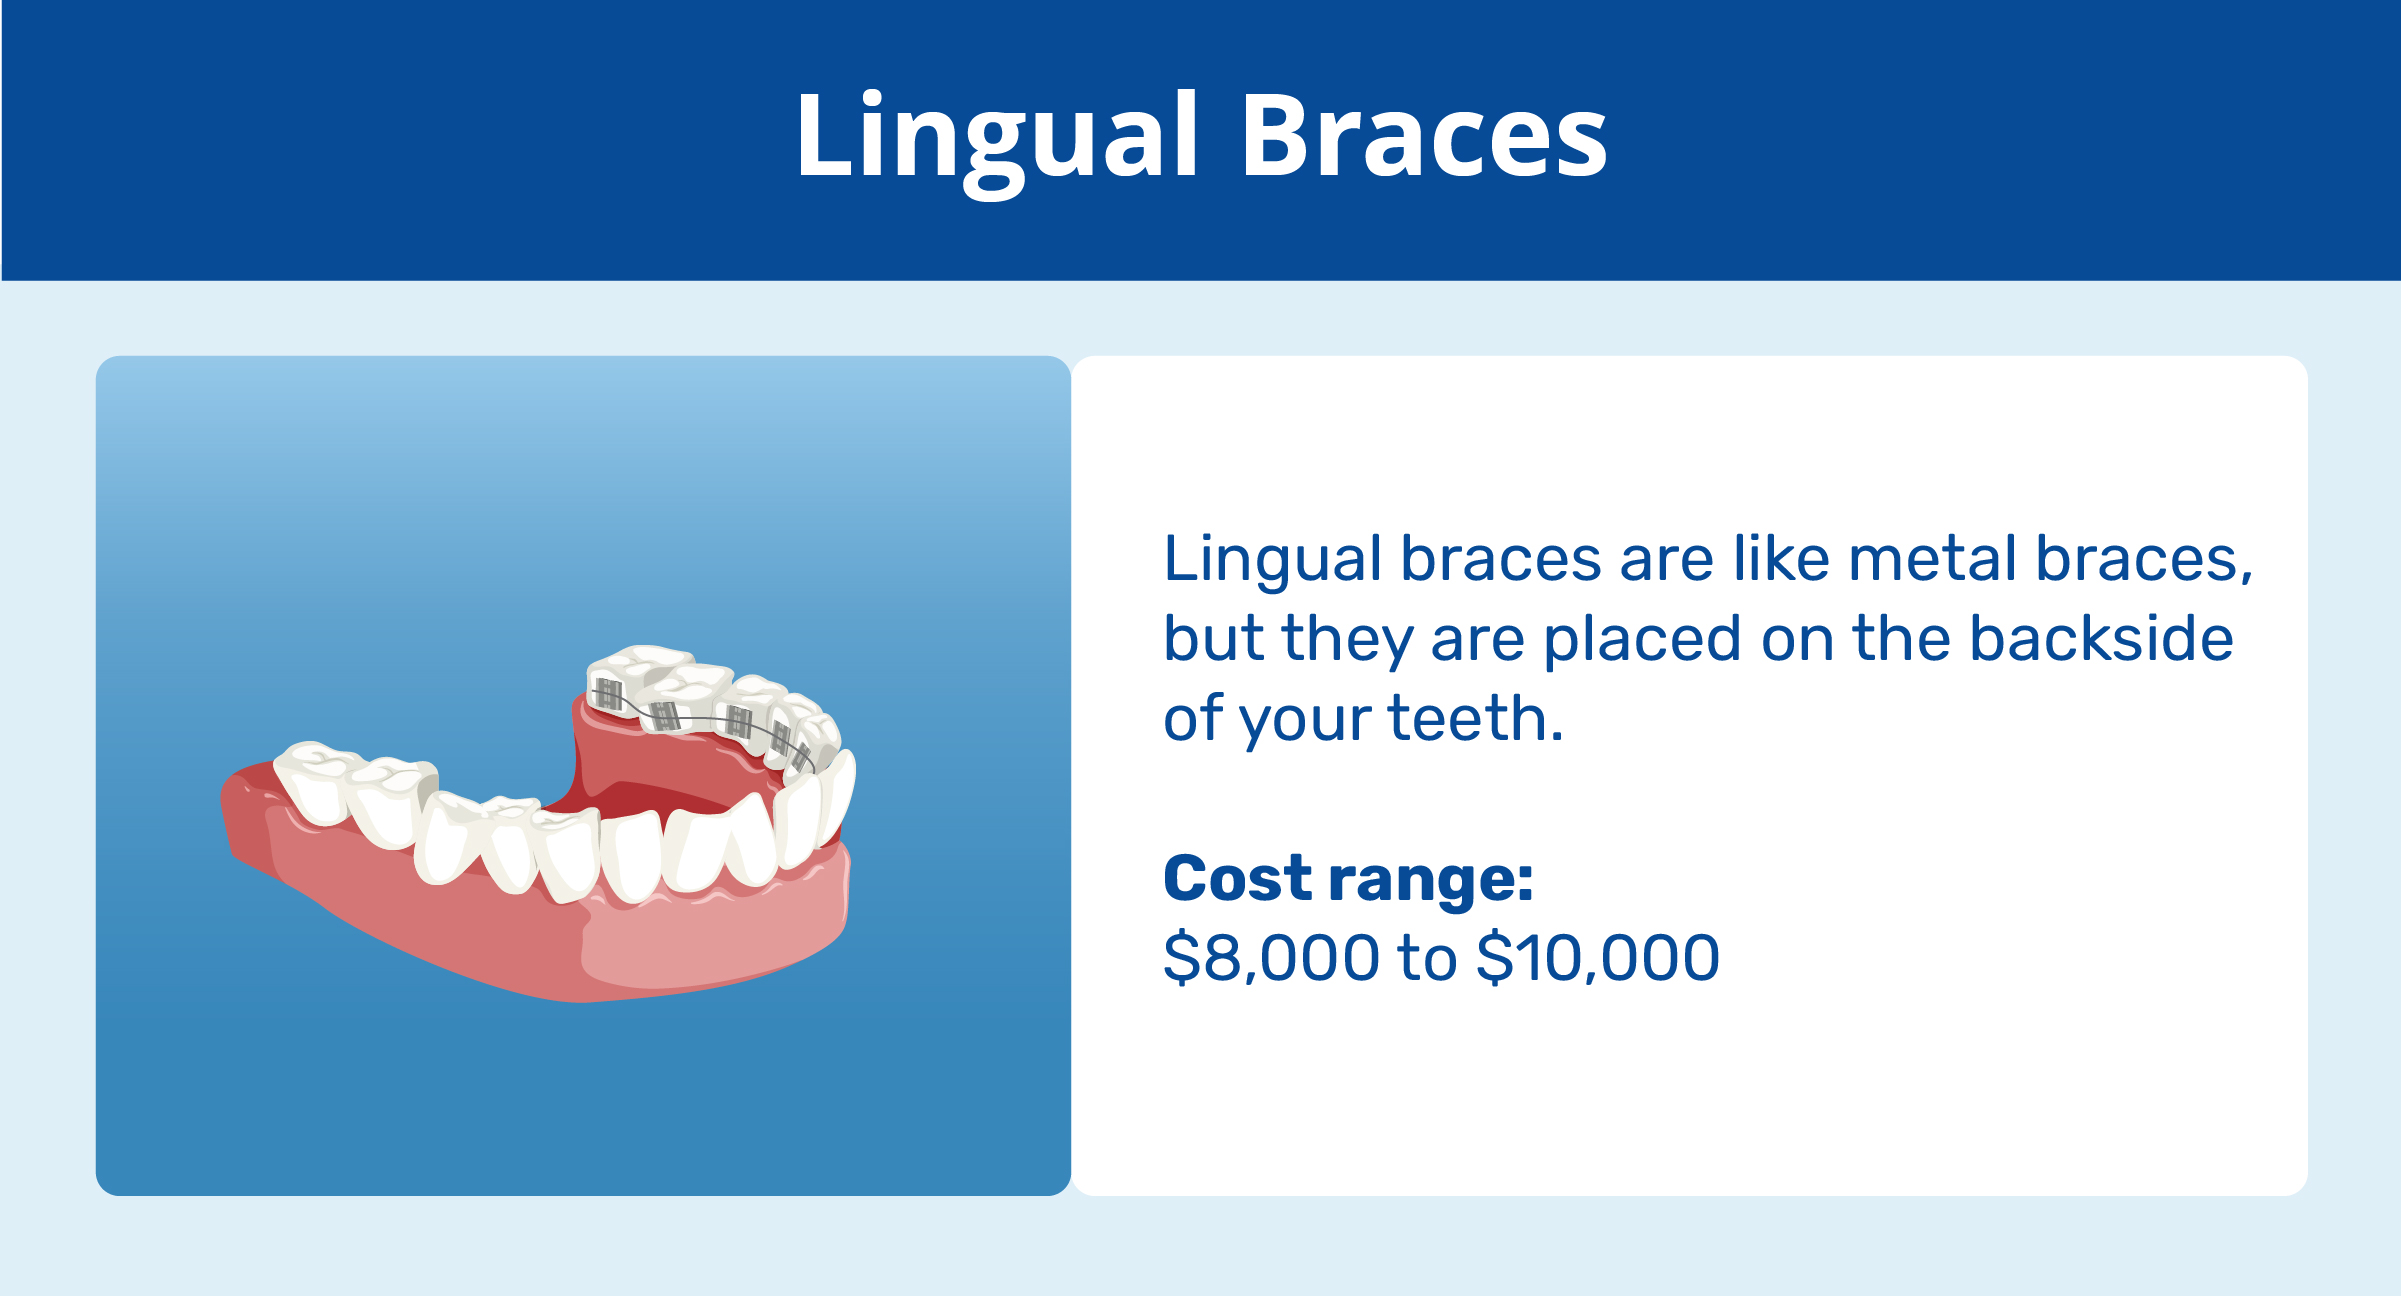 lingual braces and cost range